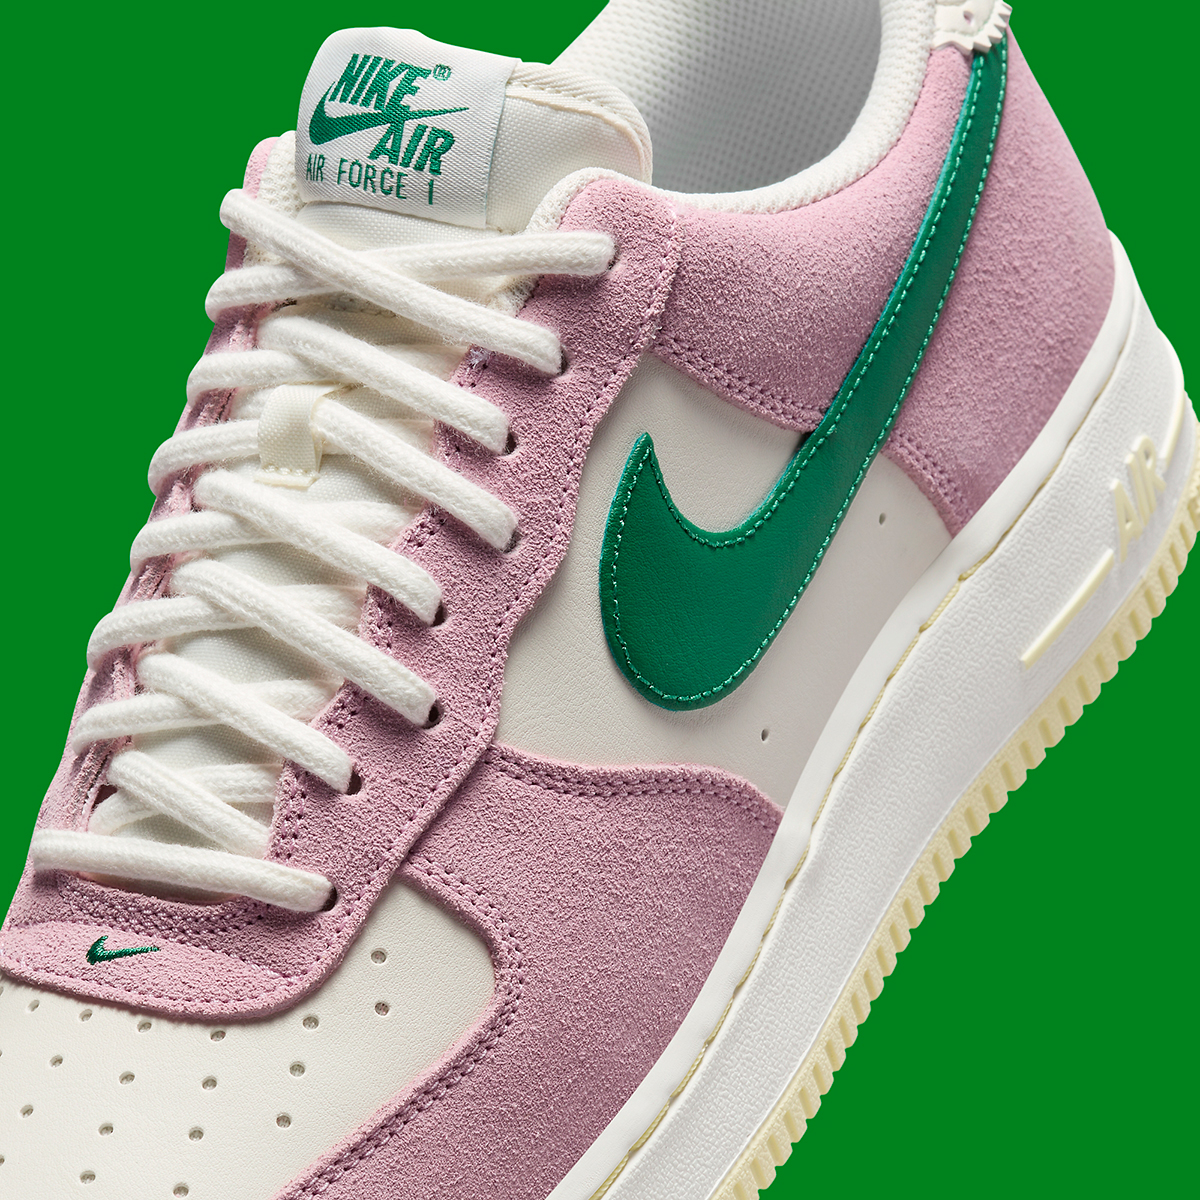 Nike eggs nike eggs roshe run mens with red spits on legs back Low Sail Malachite Soft Pink Alabaster Fv9346 100 4